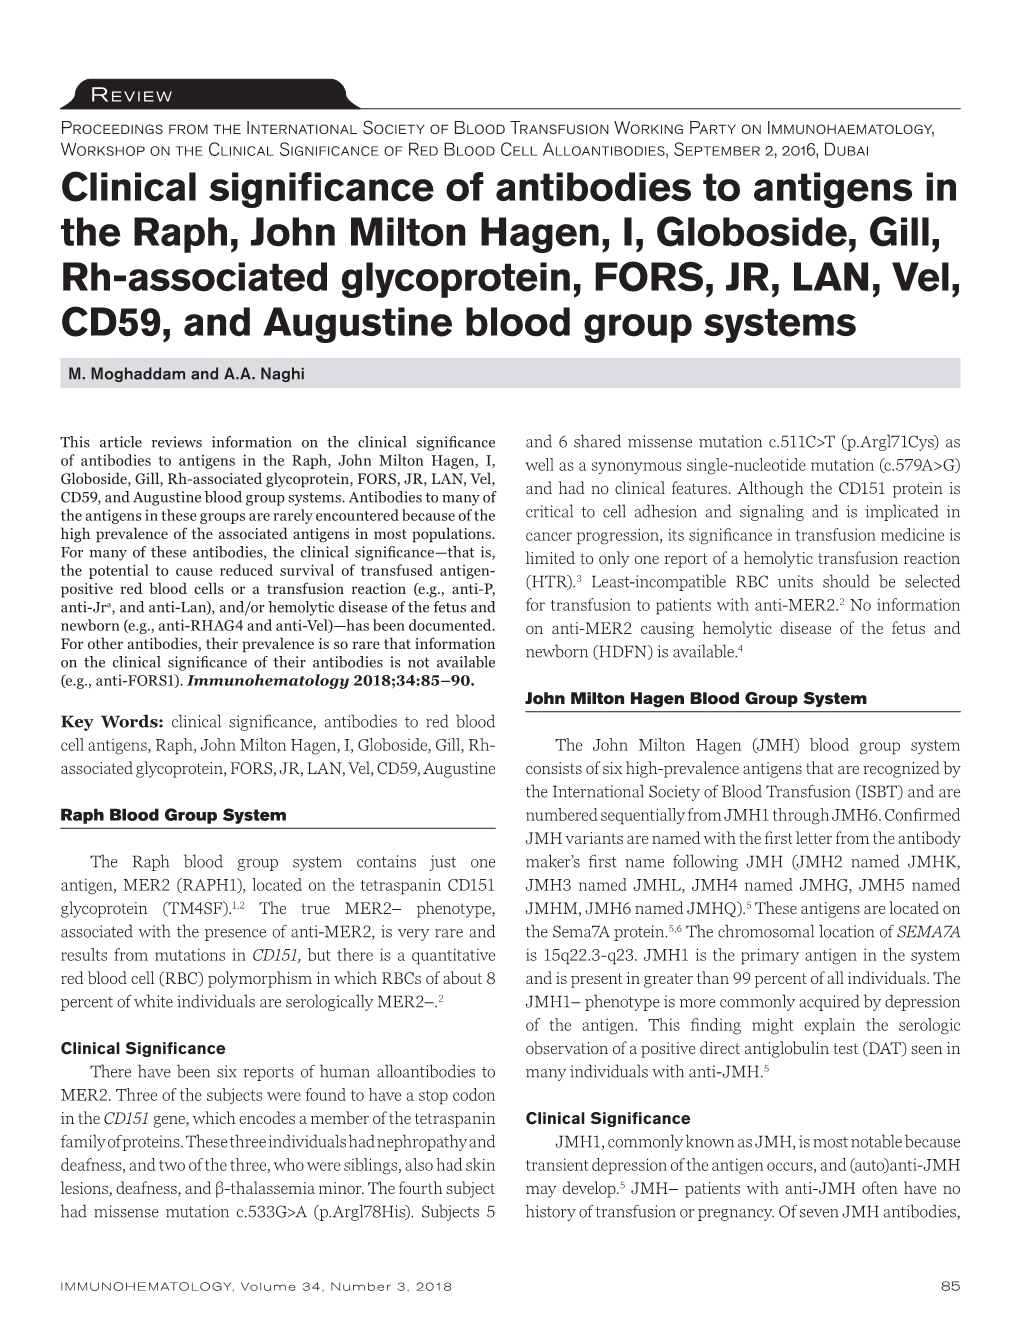 Clinical Significance of Antibodies to Antigens in the Raph, John Milton